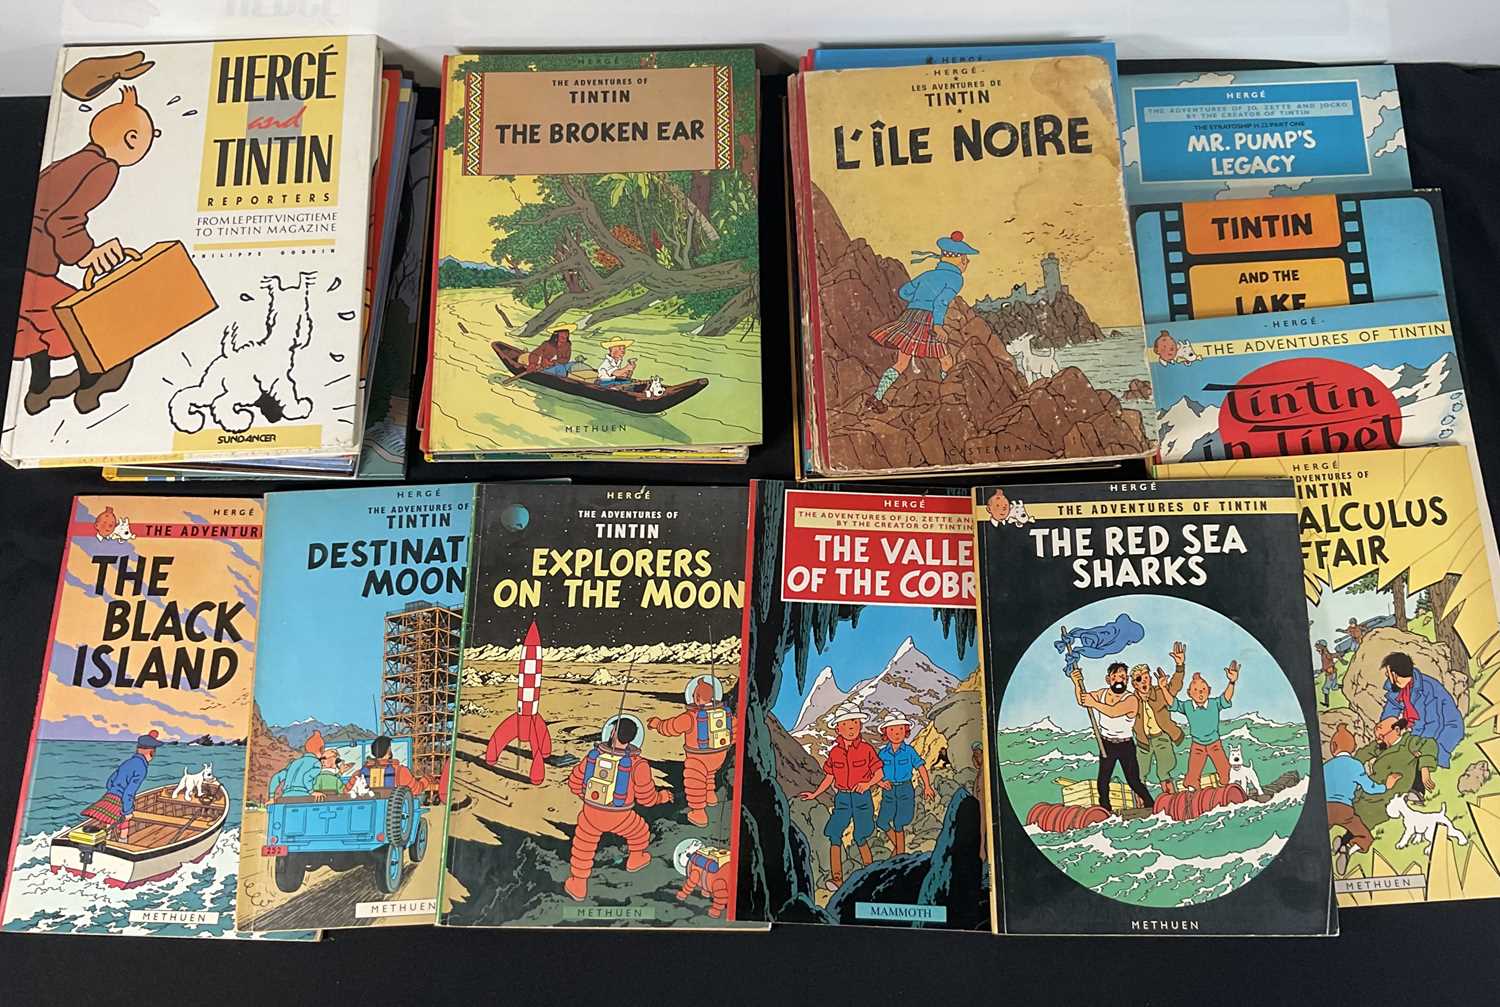 A quantity of TINTIN hardback and paperback books by Hergé, mostly 1970s editions, various